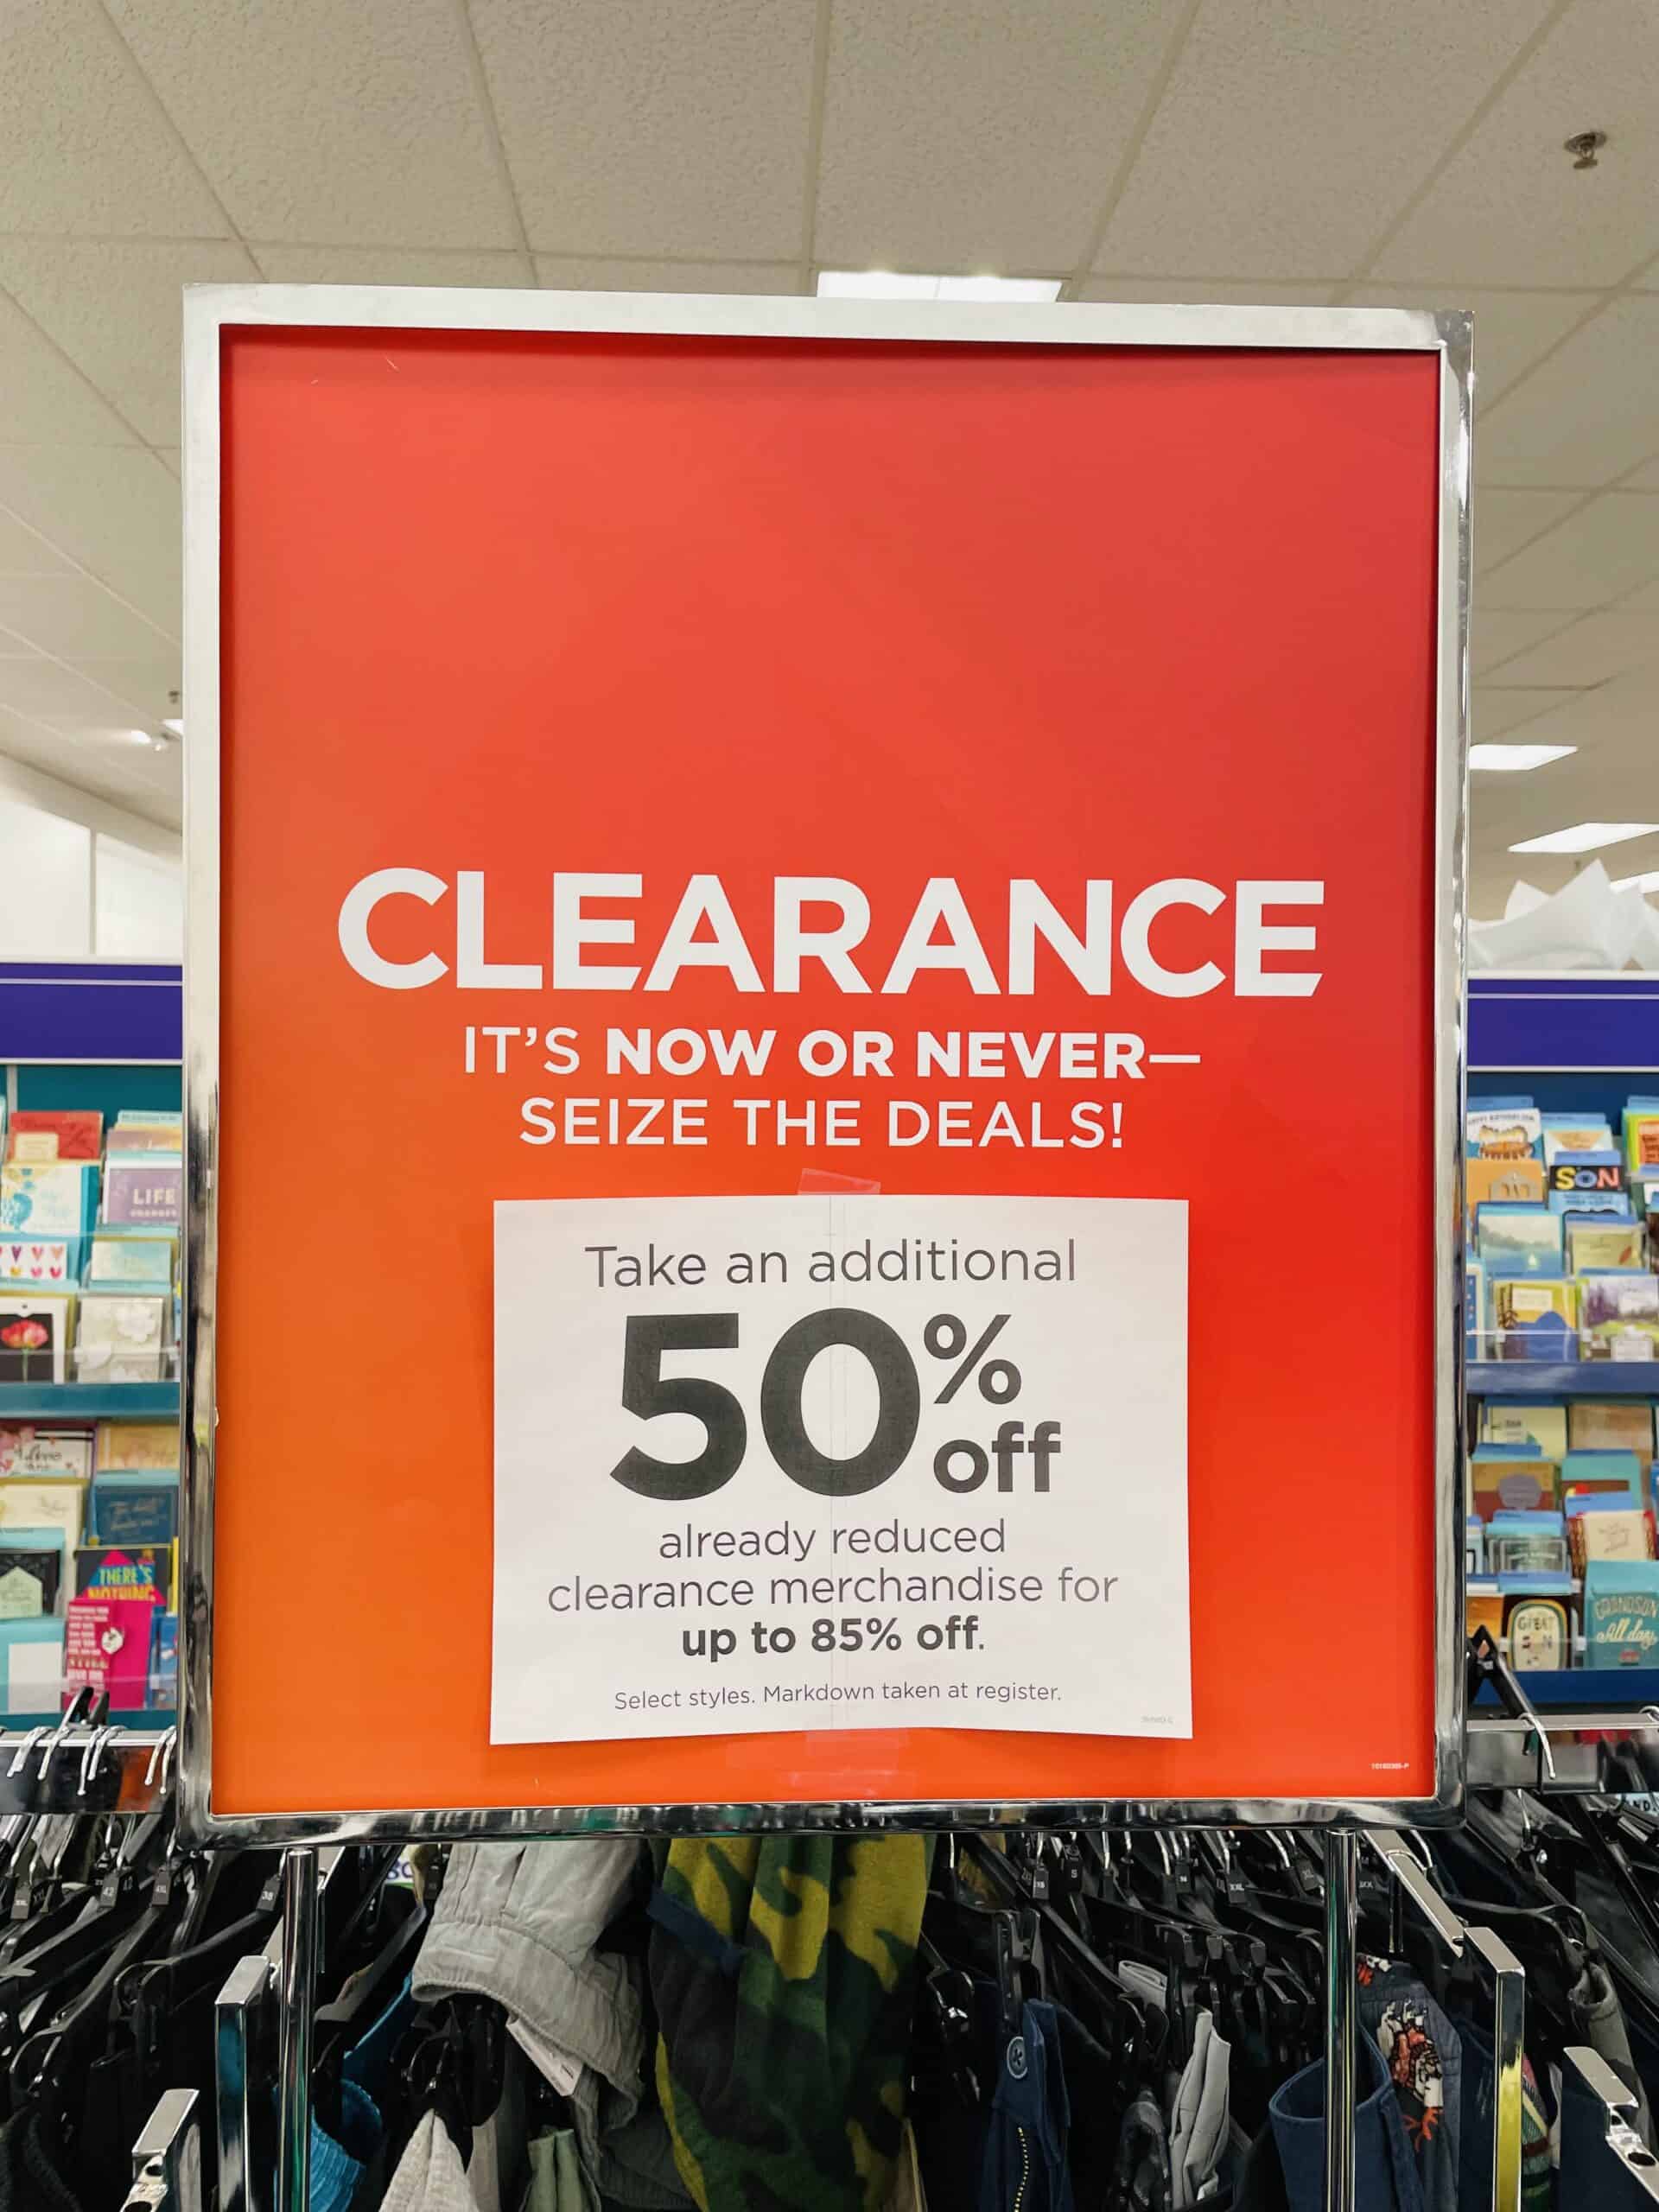 Kohl's Biggest Clearance Sale